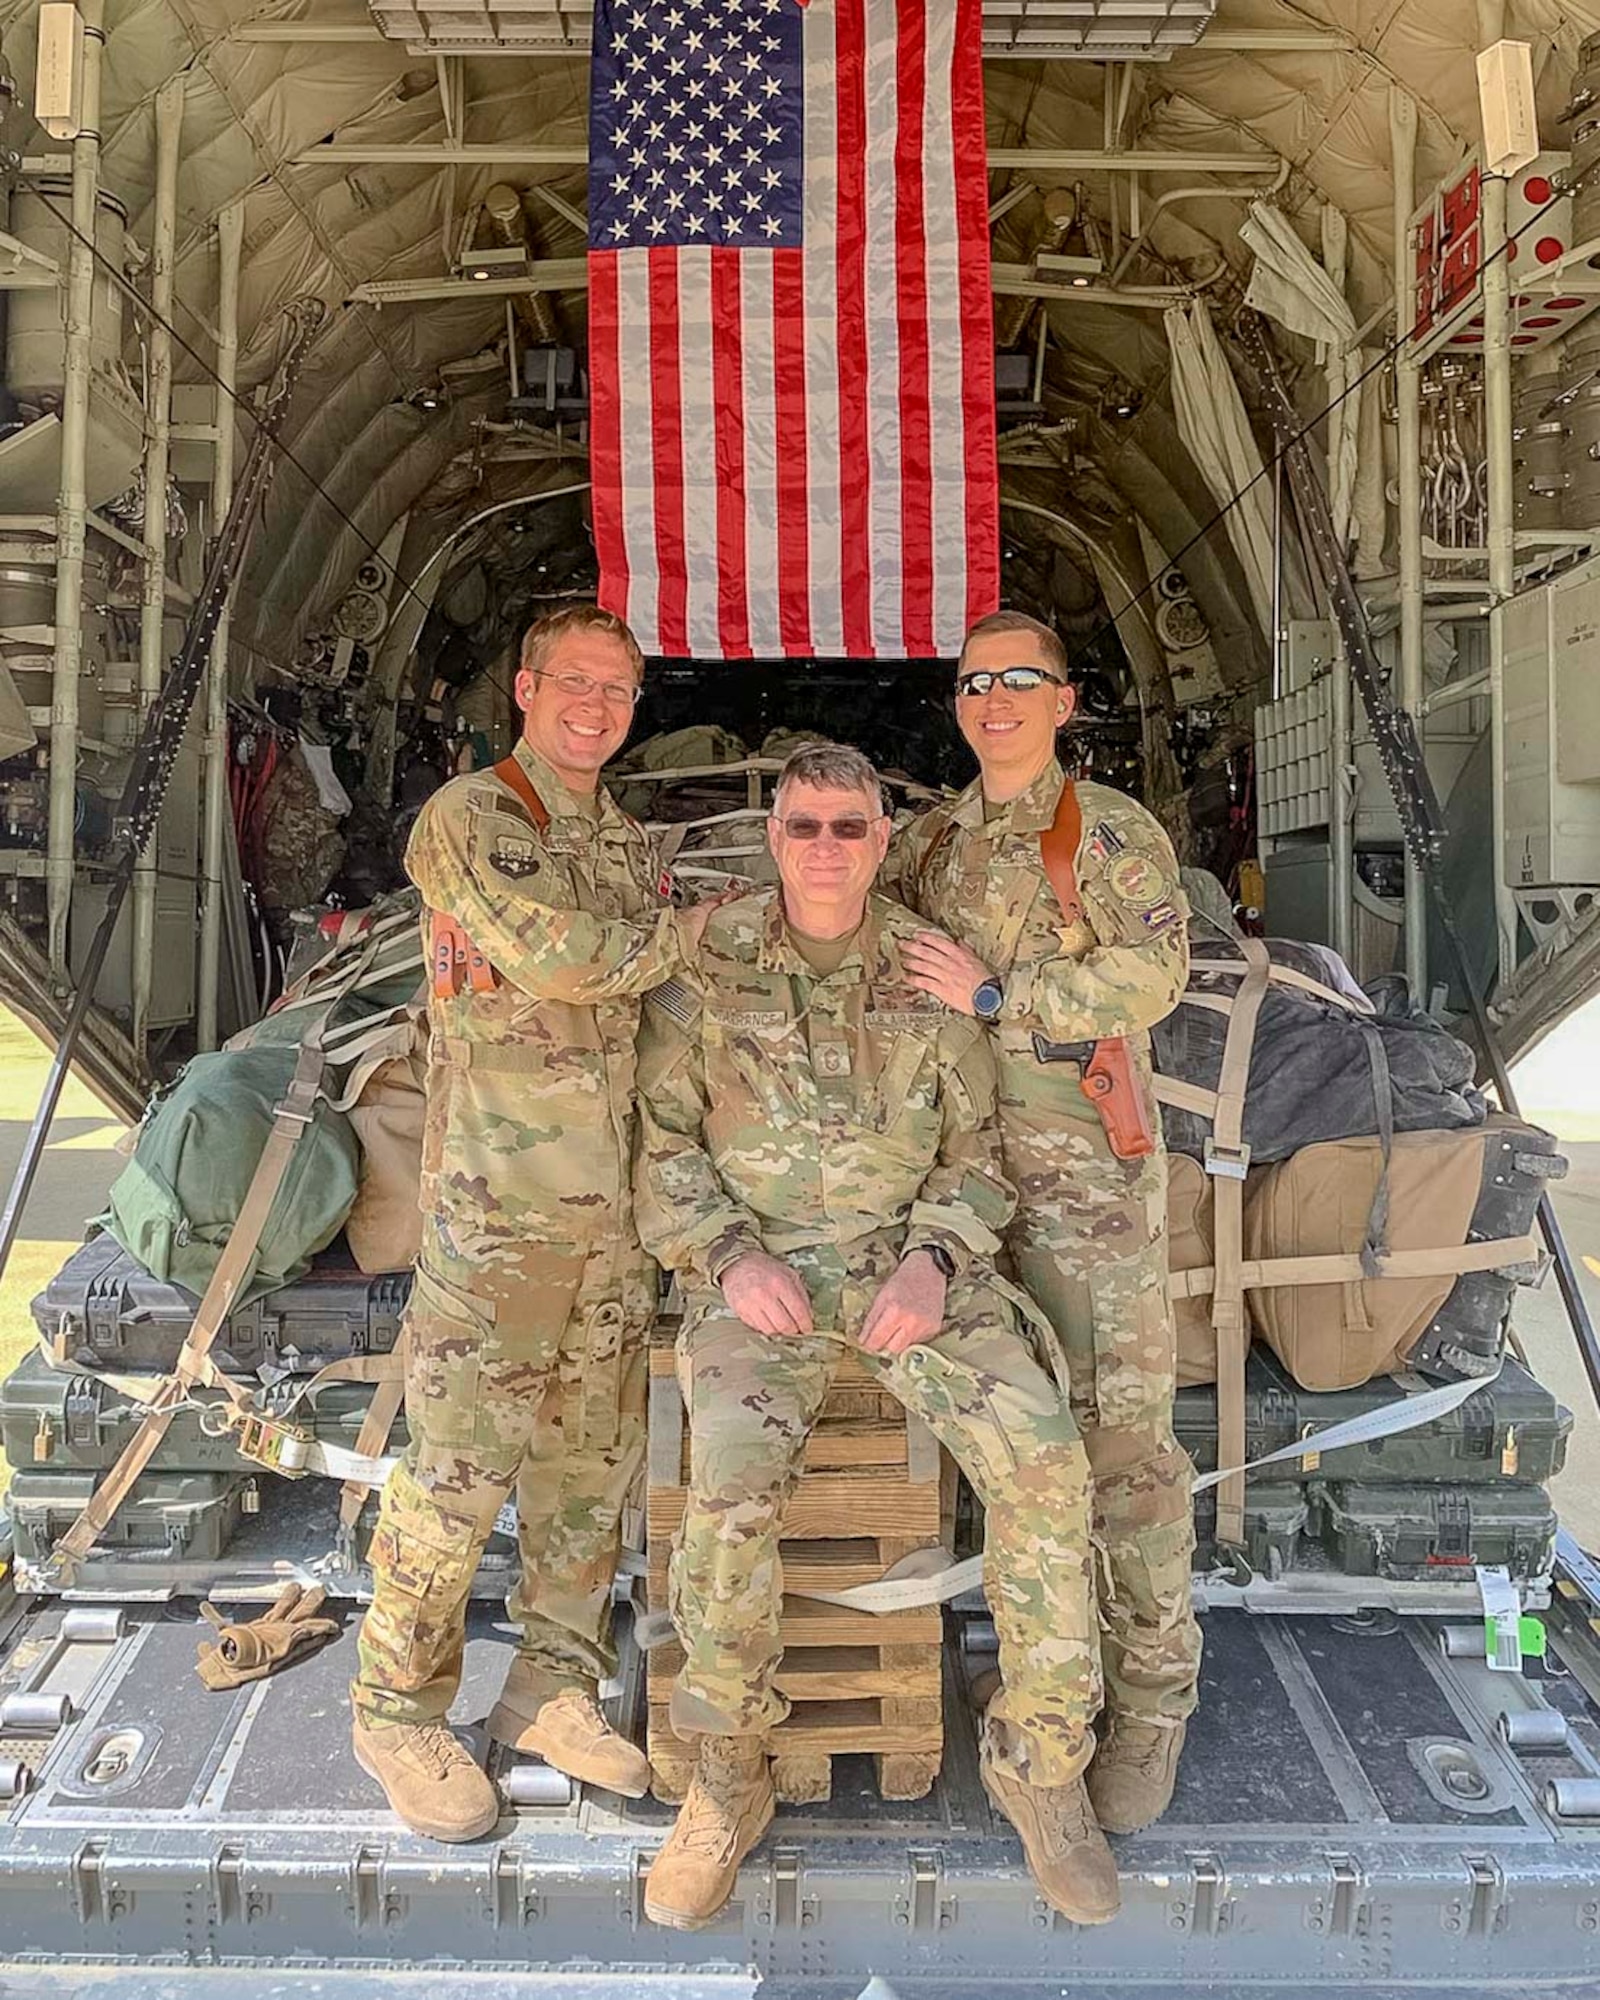 Air Force Reserve Master Sgt. Scott Klobucher (left) and Staff Sgt. Christopher James (right) poses with Chief Master Sgt. Donald Tarrance on the back of a C-130J Hercules loaded with cargo while deployed to Syria in 2019. Tarrance has served for over 40 years in a variety of positions and statuses. (Courtesy photo)